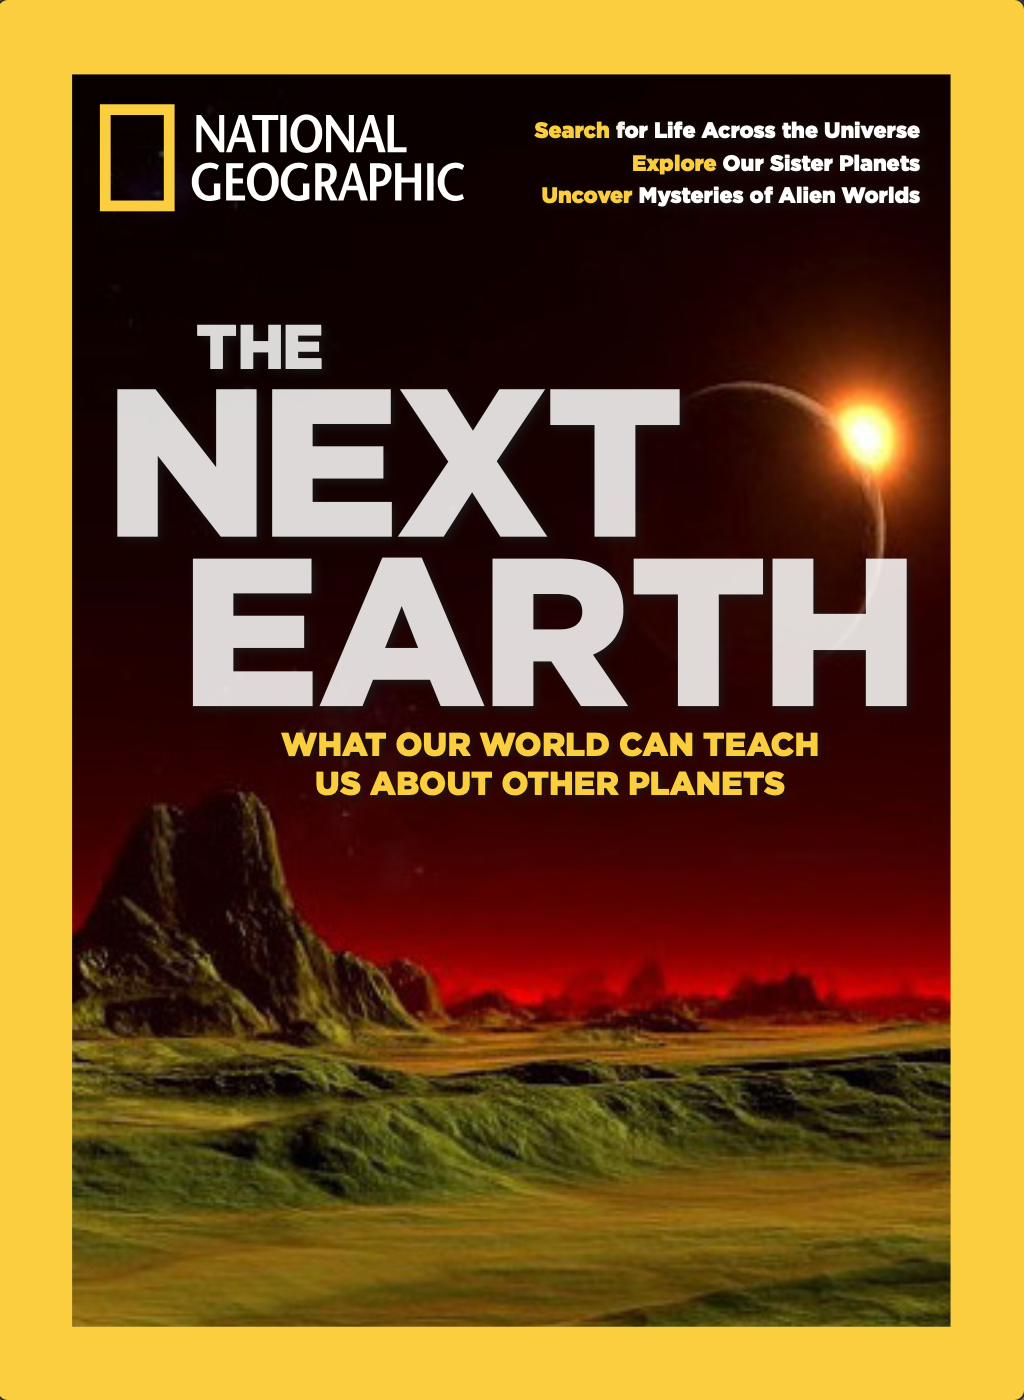 NAT GEO SPECIAL EDITION COVERS - 